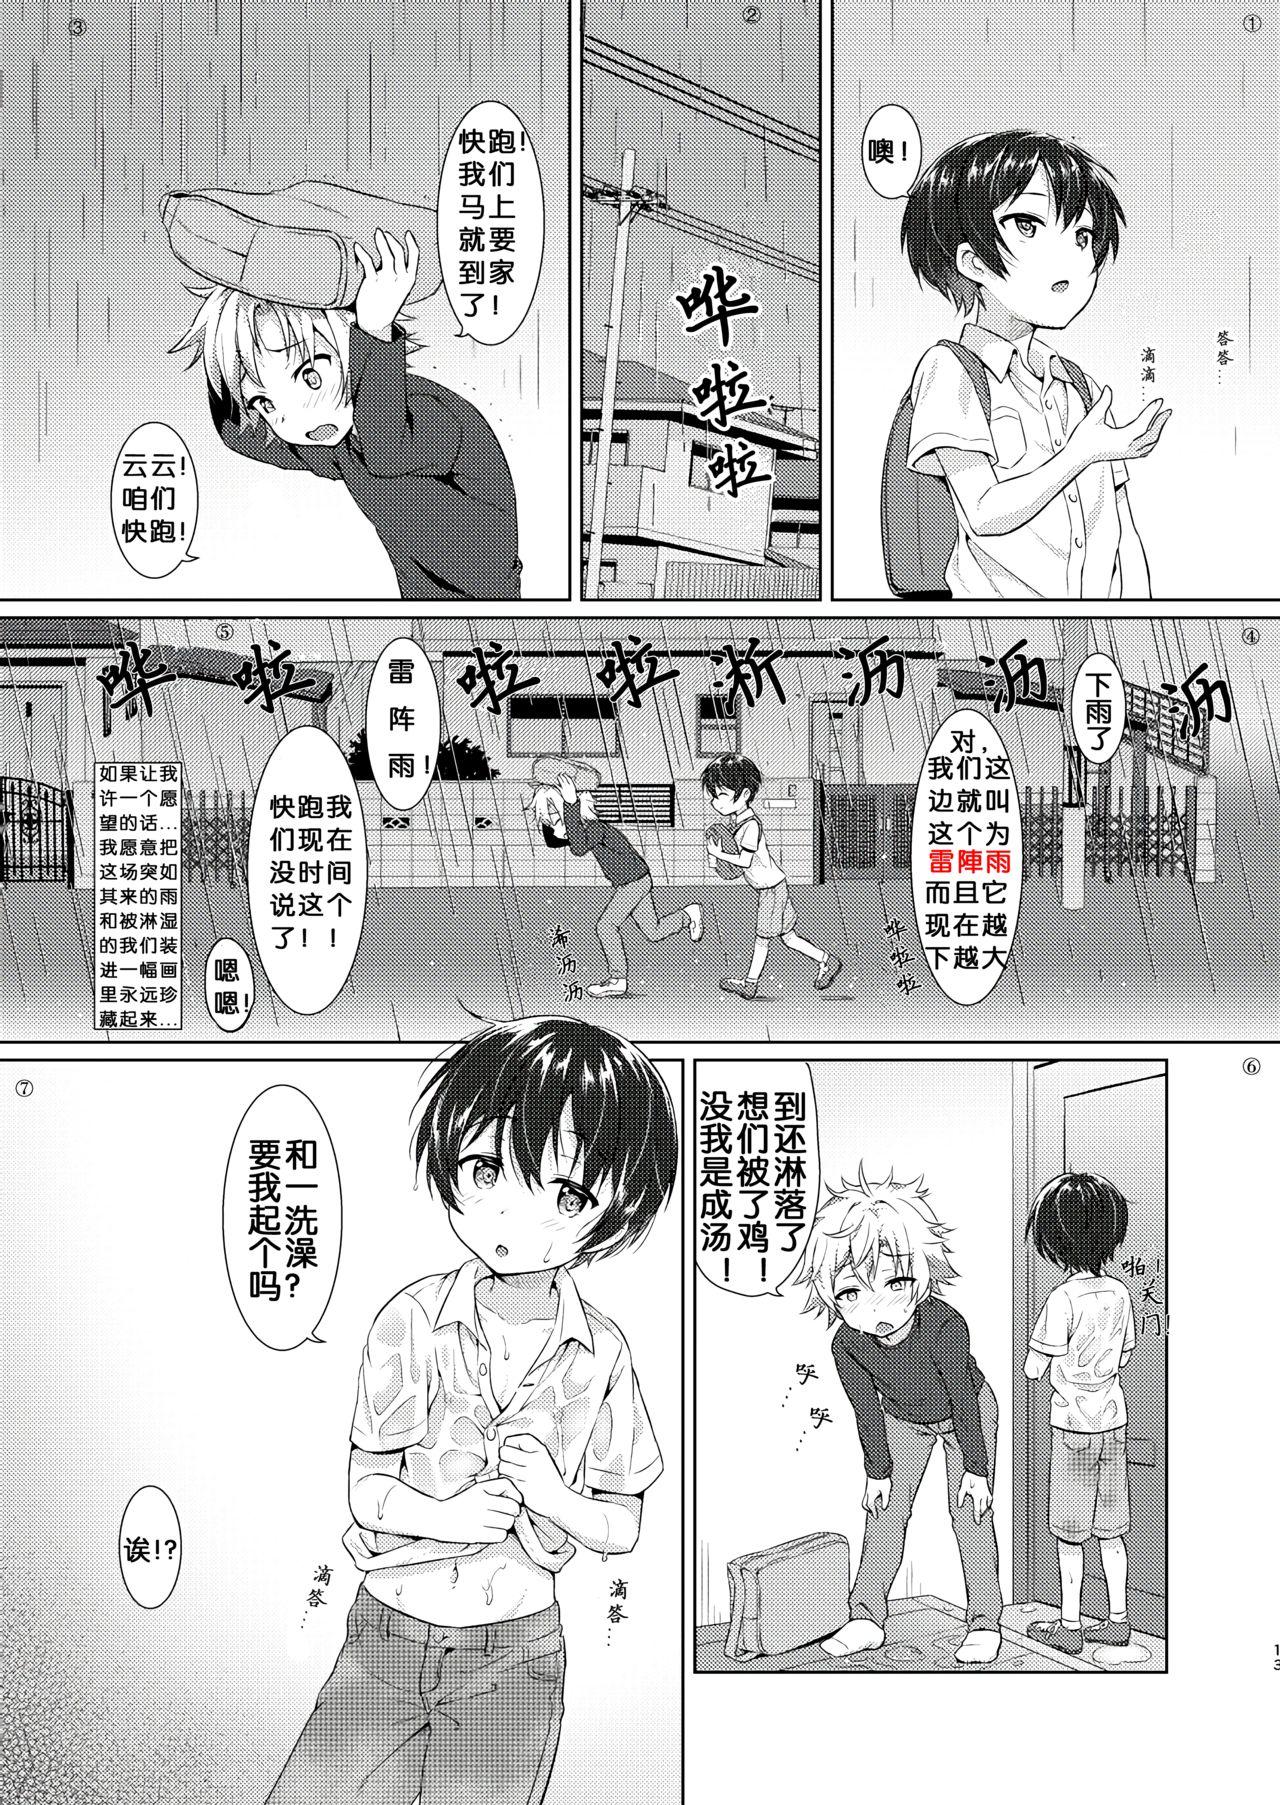 From [Commamion (Numa)] Ibunka Room Sharing - Cross-Cultural Room Sharing [Chinese] [Decensored] [Digital] - Original Brother Sister - Page 11